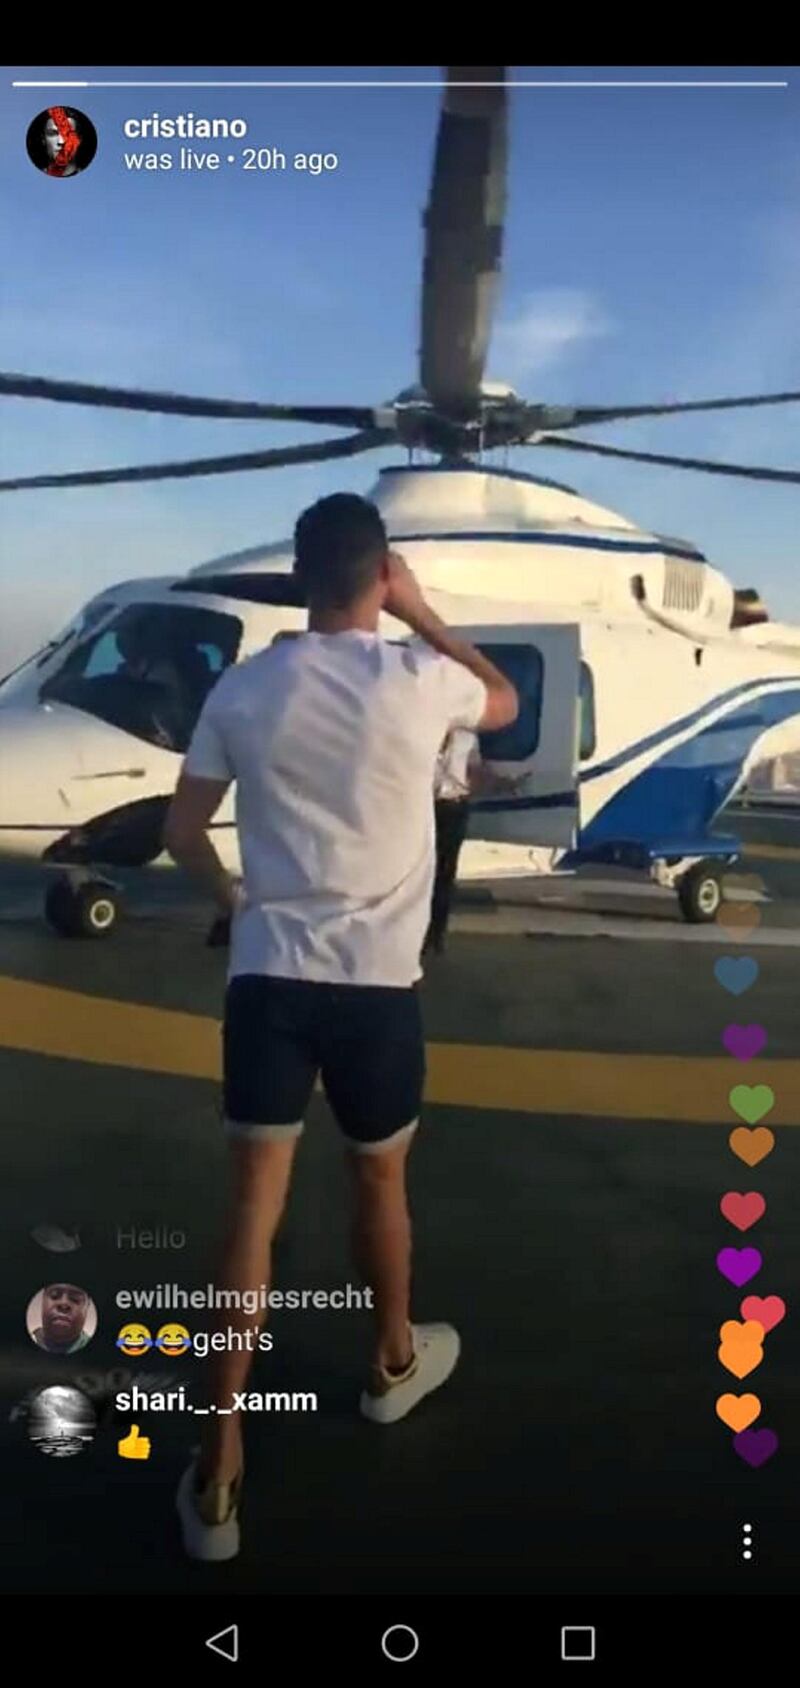 Ronaldo makes his way to the helicopter. Courtesy cristiano / Instagram